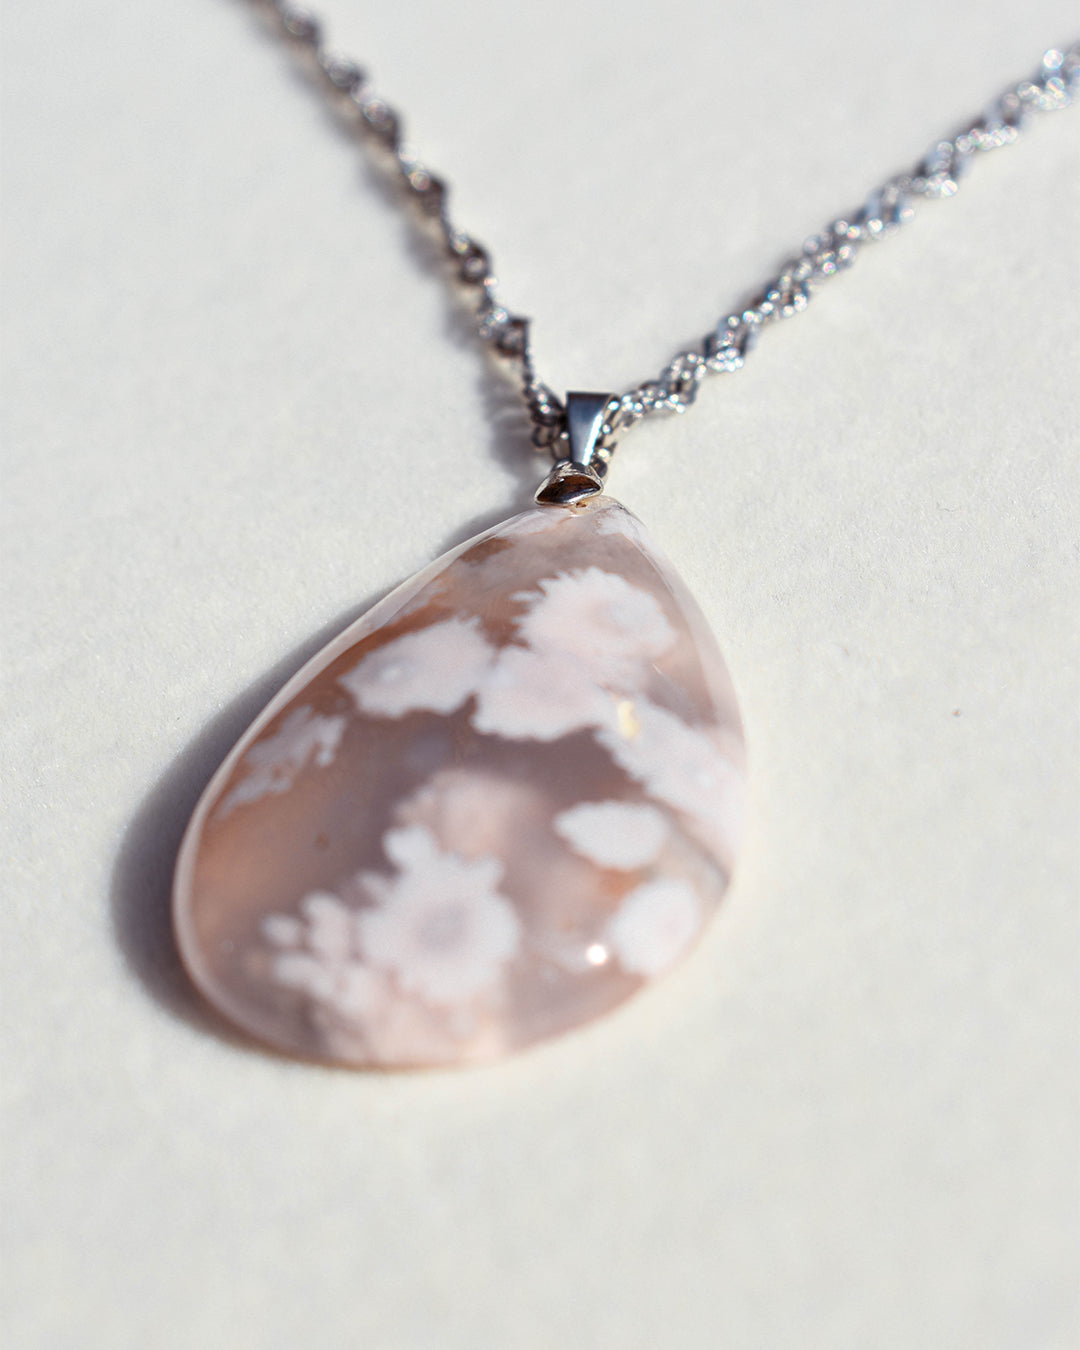 Stainless Steel chain with Flower Agate crystal pendant